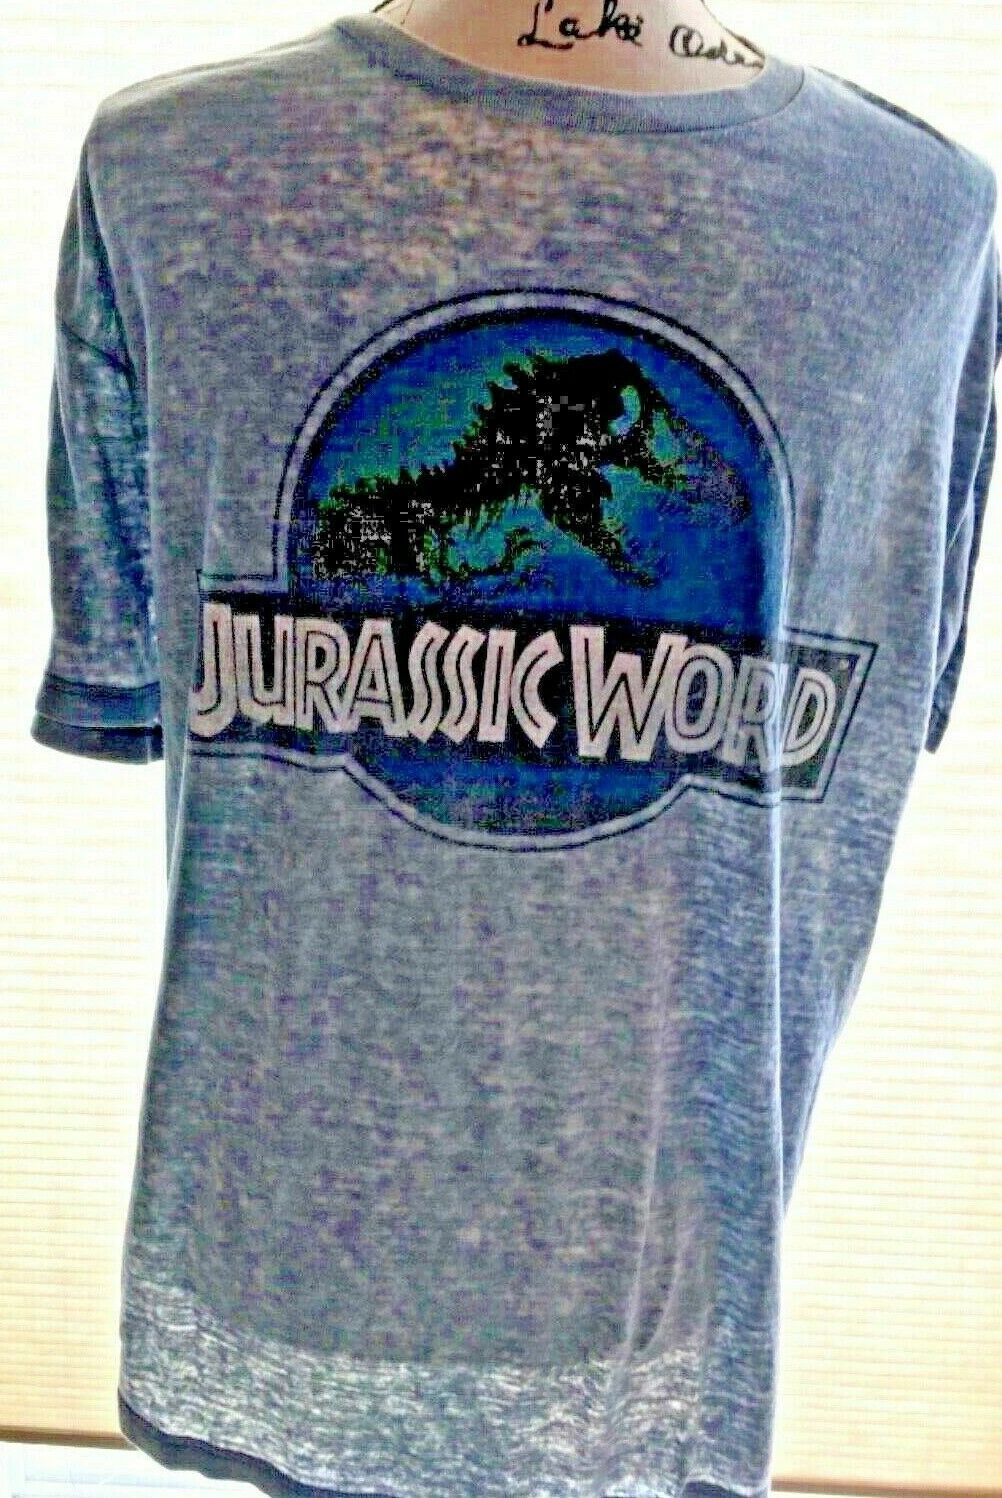 Primary image for Men’s Rare Look Jurassic World T-Shirt Large Blue Unusual SKU 077-018